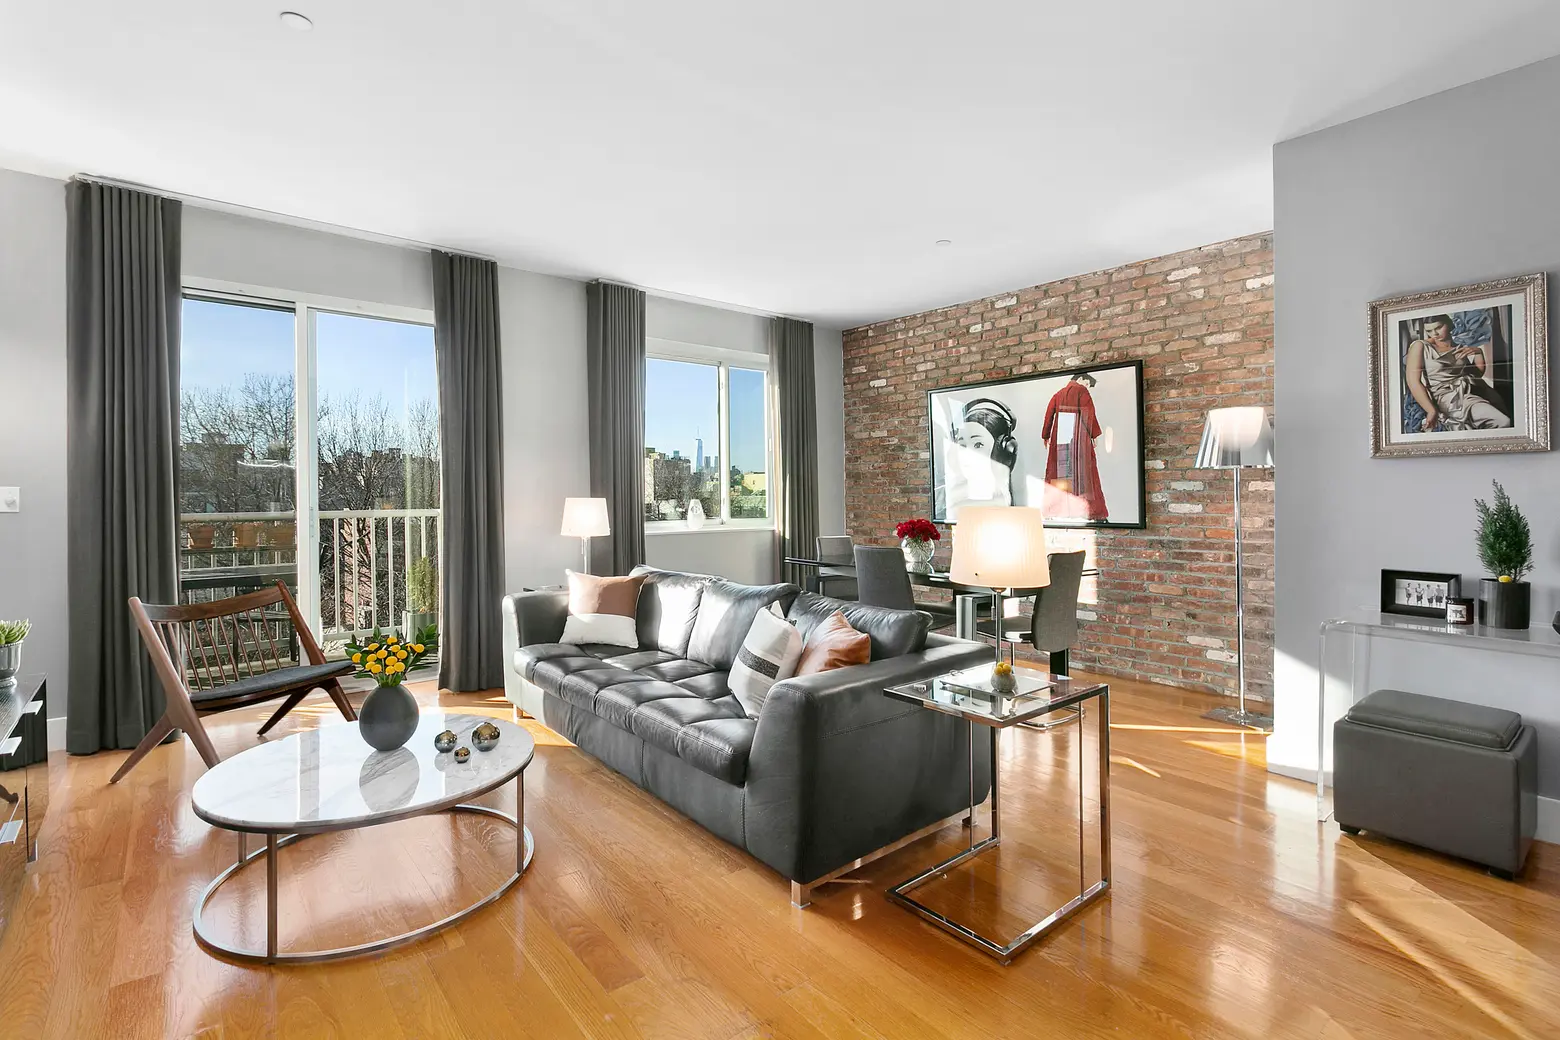 For $799K, this well-outfitted Bed-Stuy condo is set up for easy living